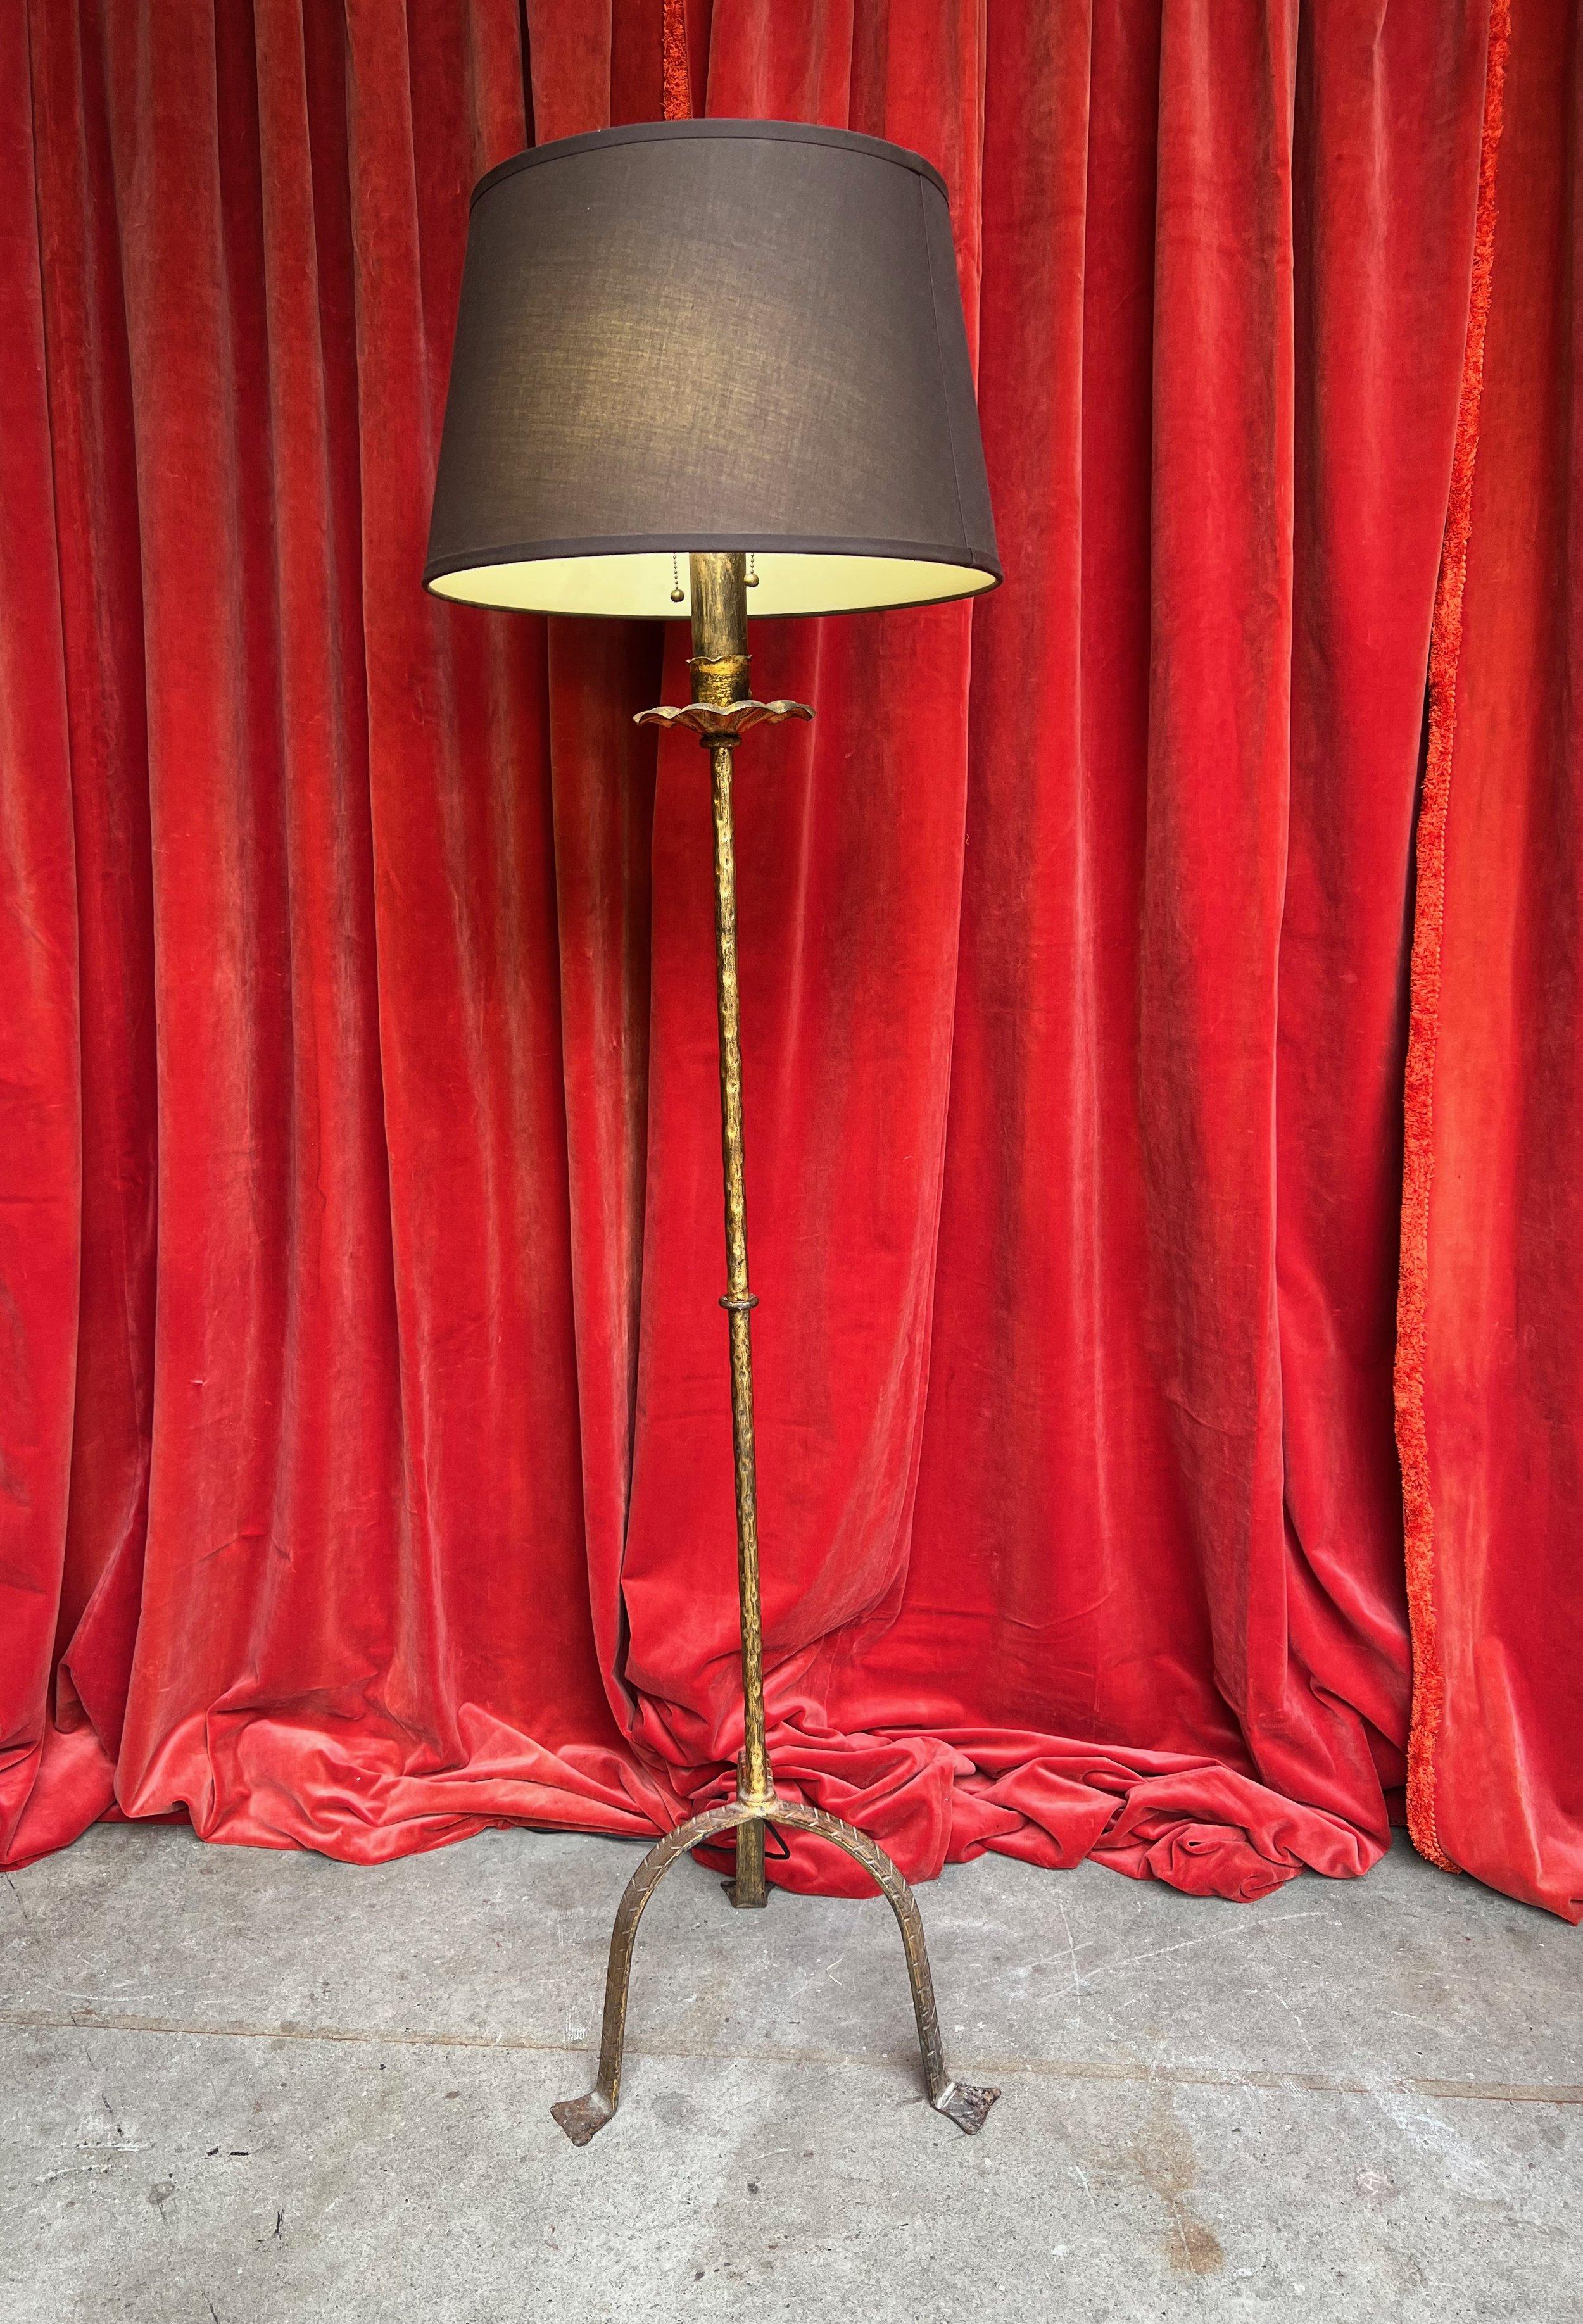 This classic iron floor lamp is a stunning addition to any living space, featuring a hand-patinated gilt finish that adds a touch of sophistication. Skillfully handmade in Spain during the 1950s, this lamp boasts exceptional quality and timeless